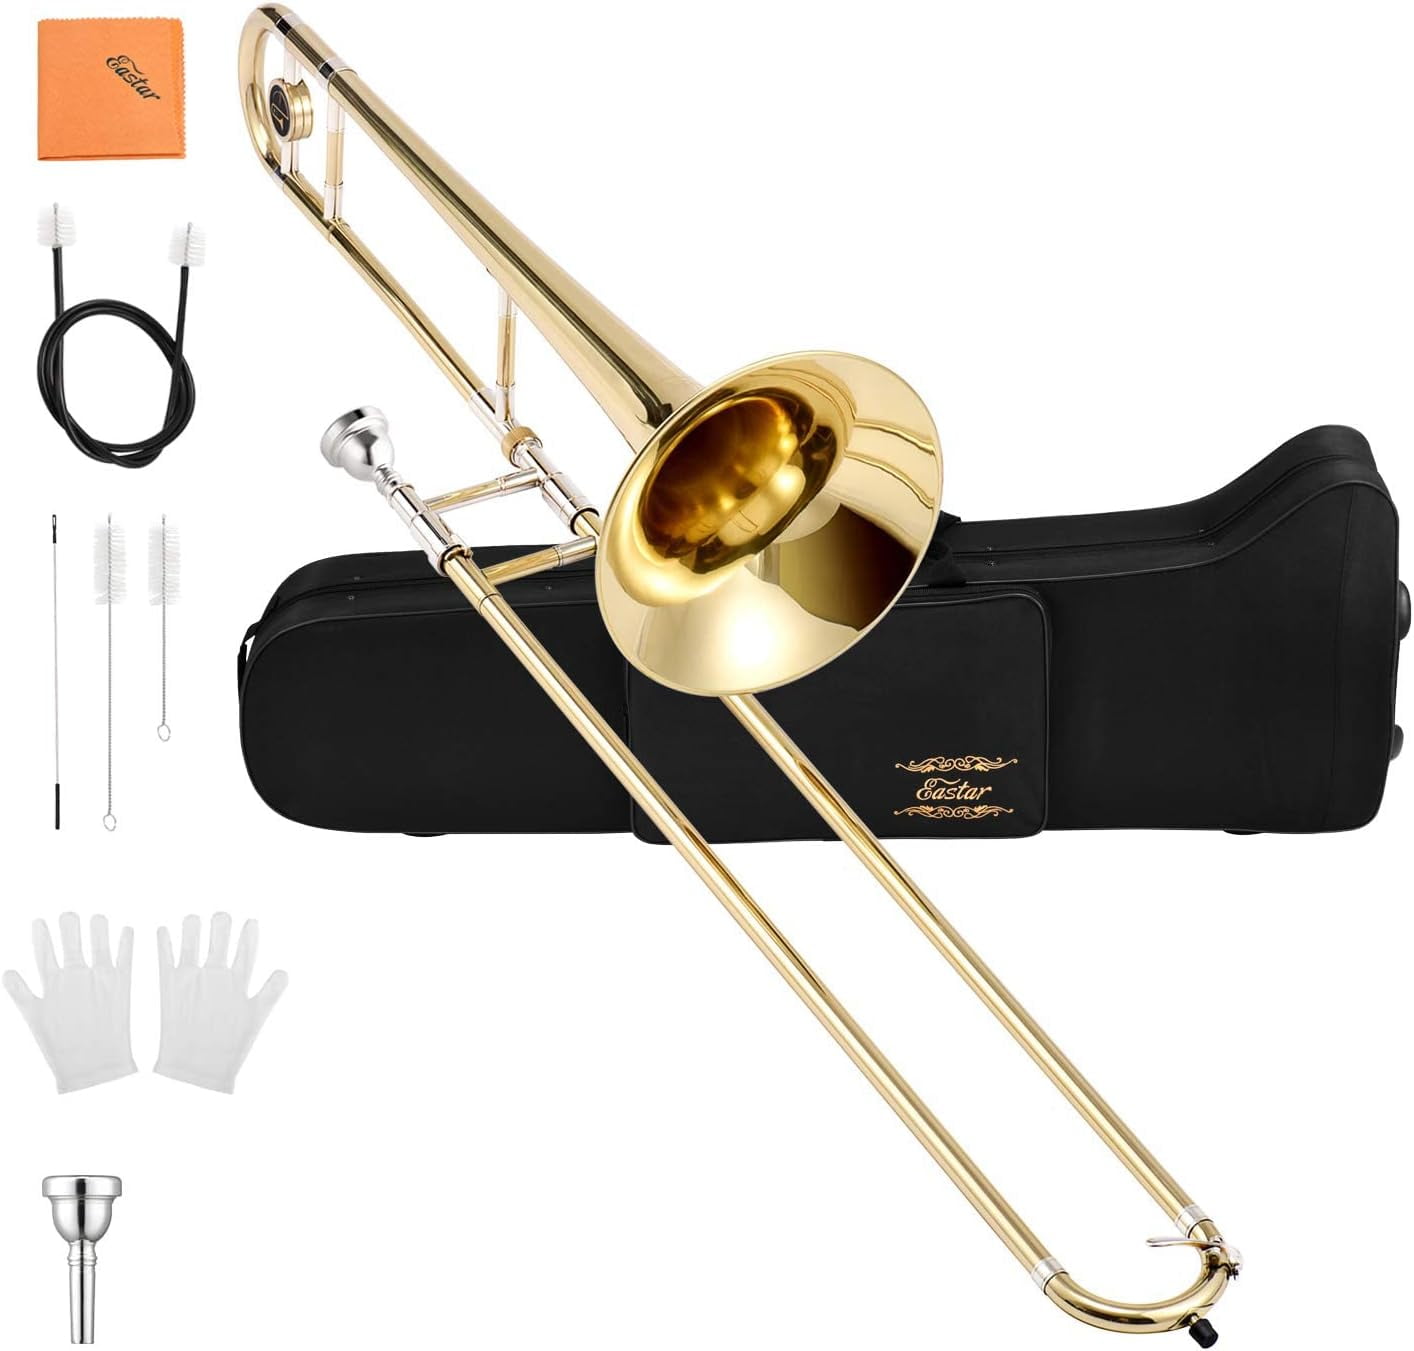 Eastar Bb Tenor Trombone for Beginners Students B Flat Brass Instrument,  with Case, Mouthpiece, White Gloves, Cleaning Kit, Gold 